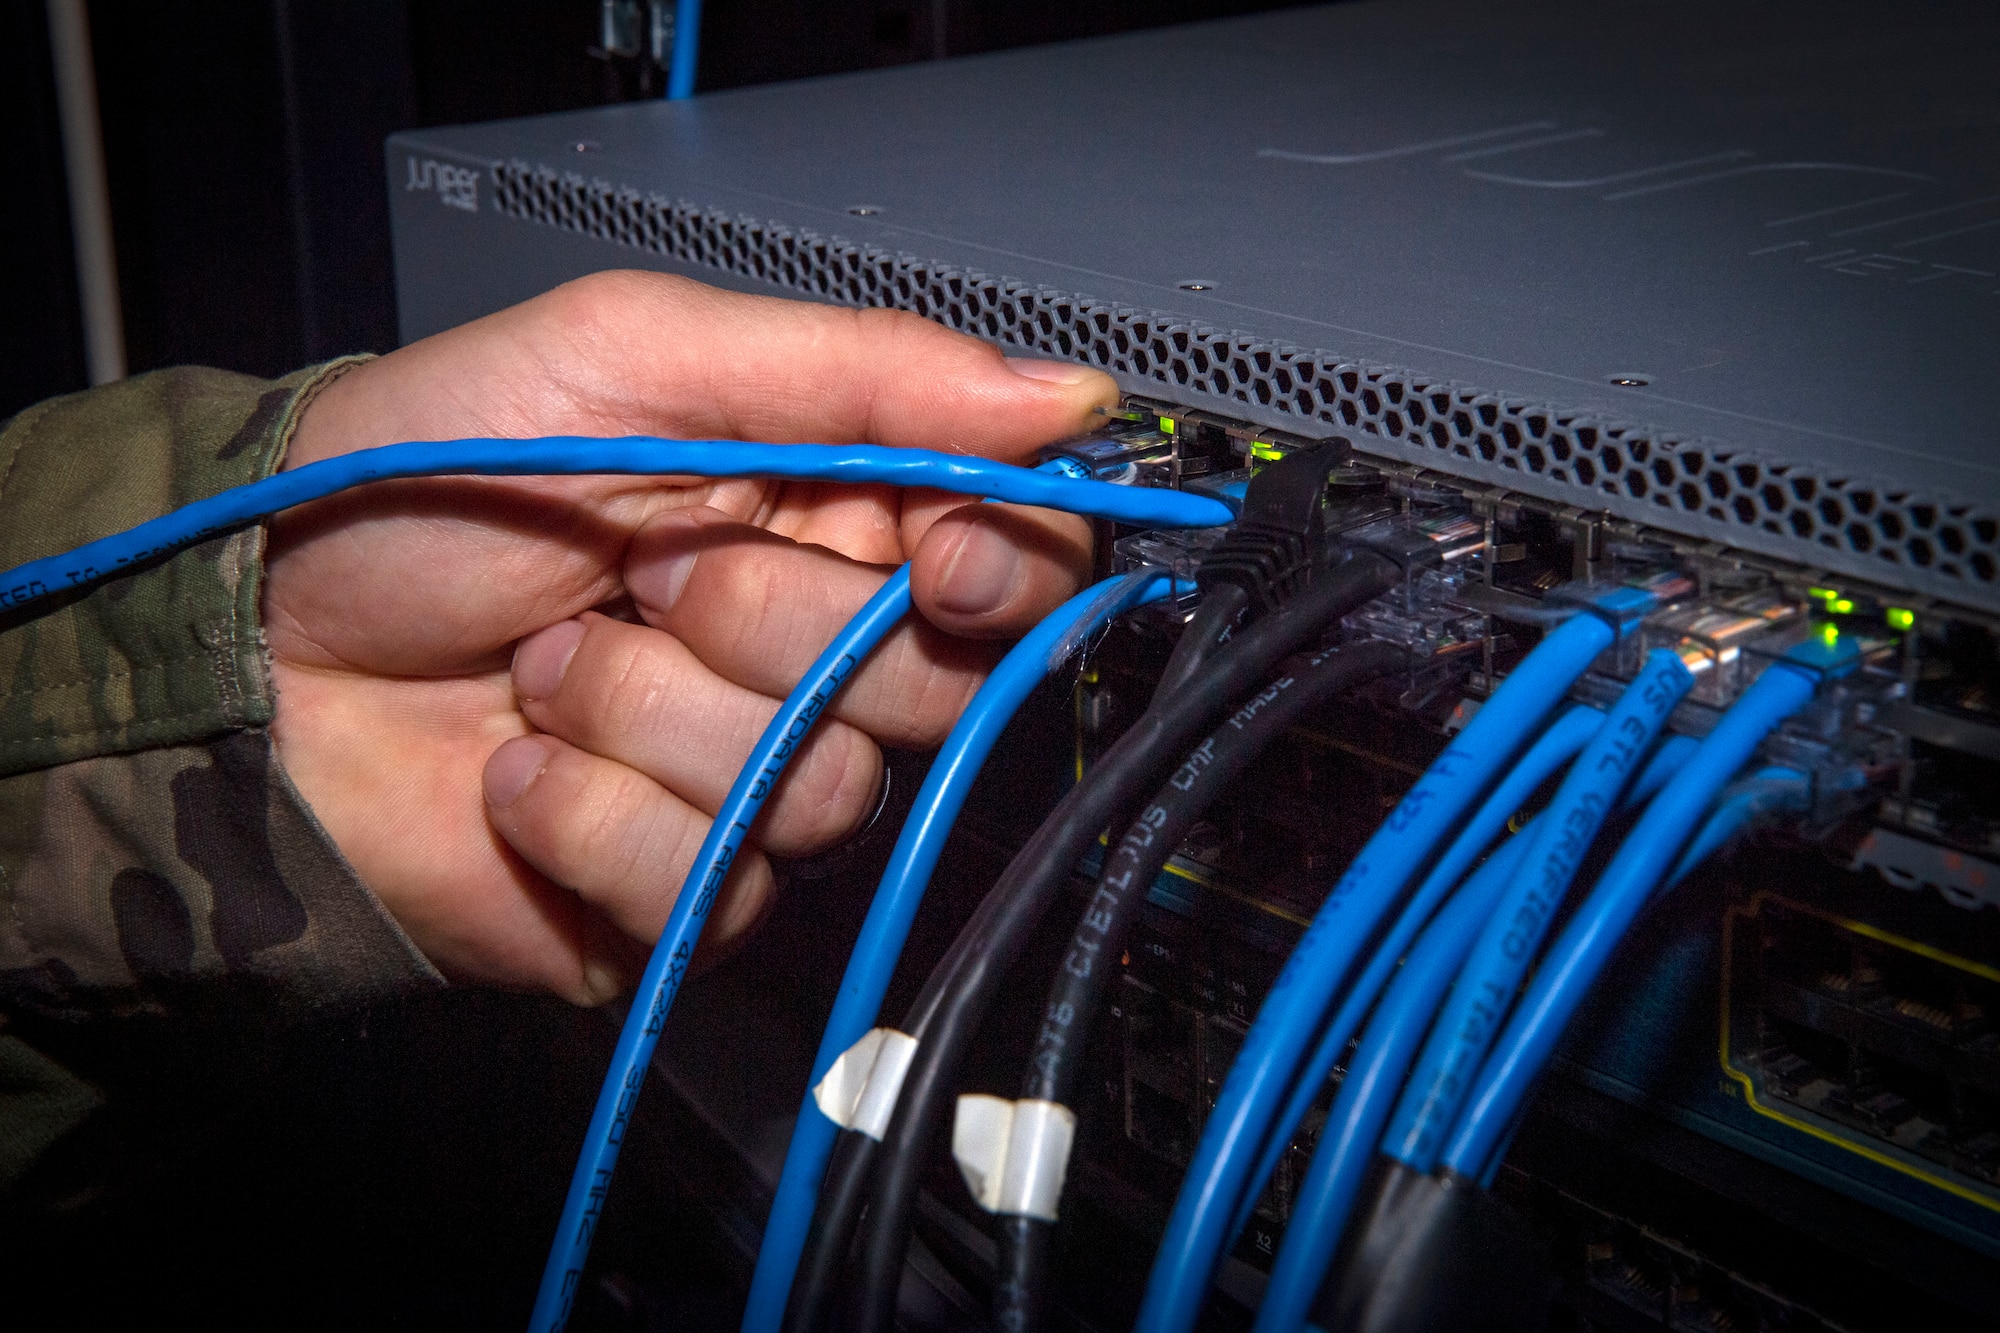 Tech. Sgt. Patrick Gildea, a 6th Communications Squadron (CS) Mission Defense Team supervisor, plugs in a new ethernet cable into a computer server at MacDill Air Force Base, Florida, July 8, 2021.